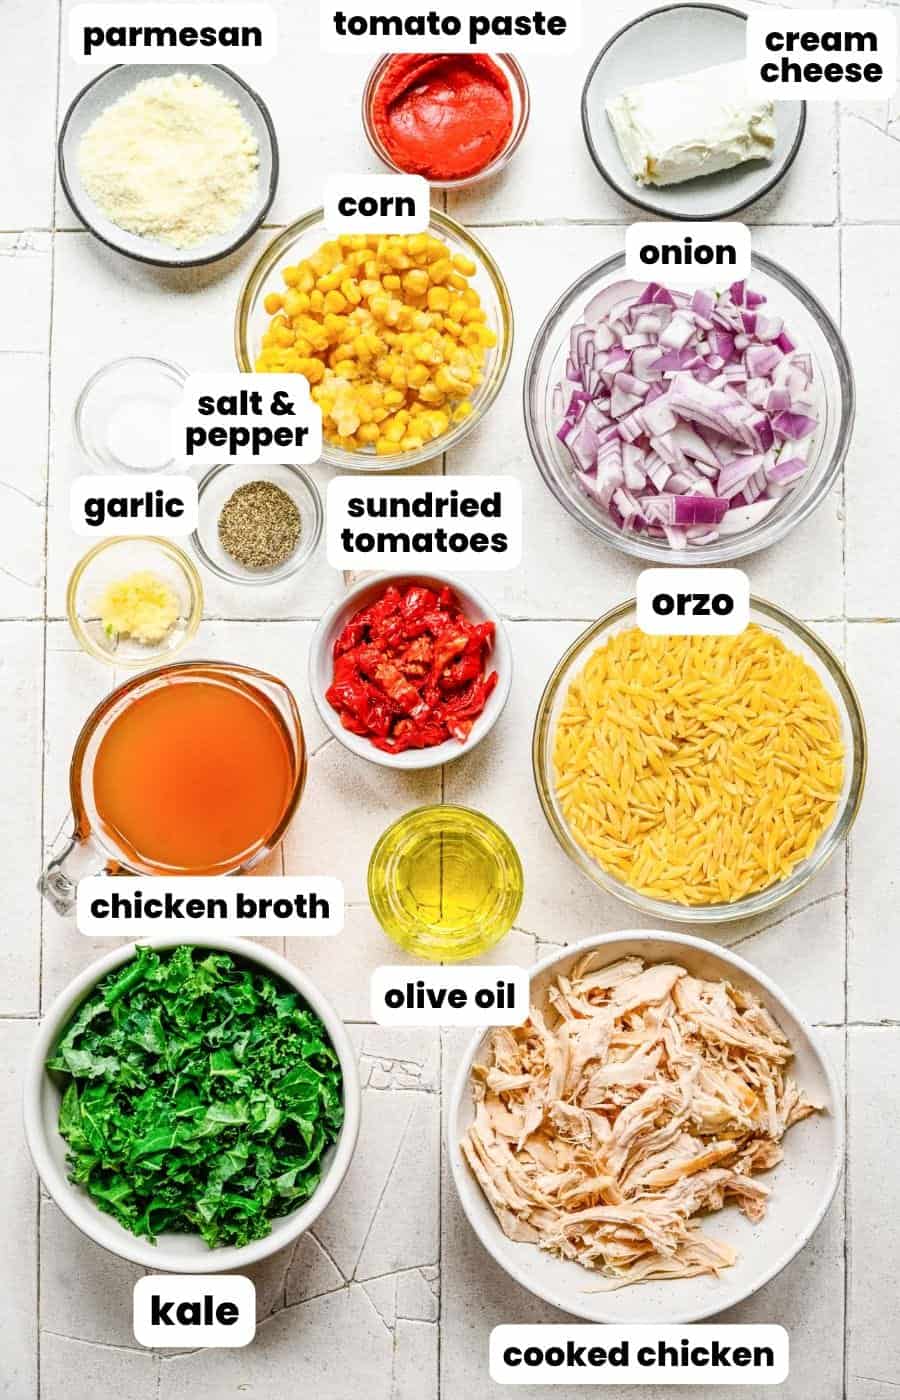 The ingredients needed to make the best creamy chicken orzo with sundried tomatoes and corn.